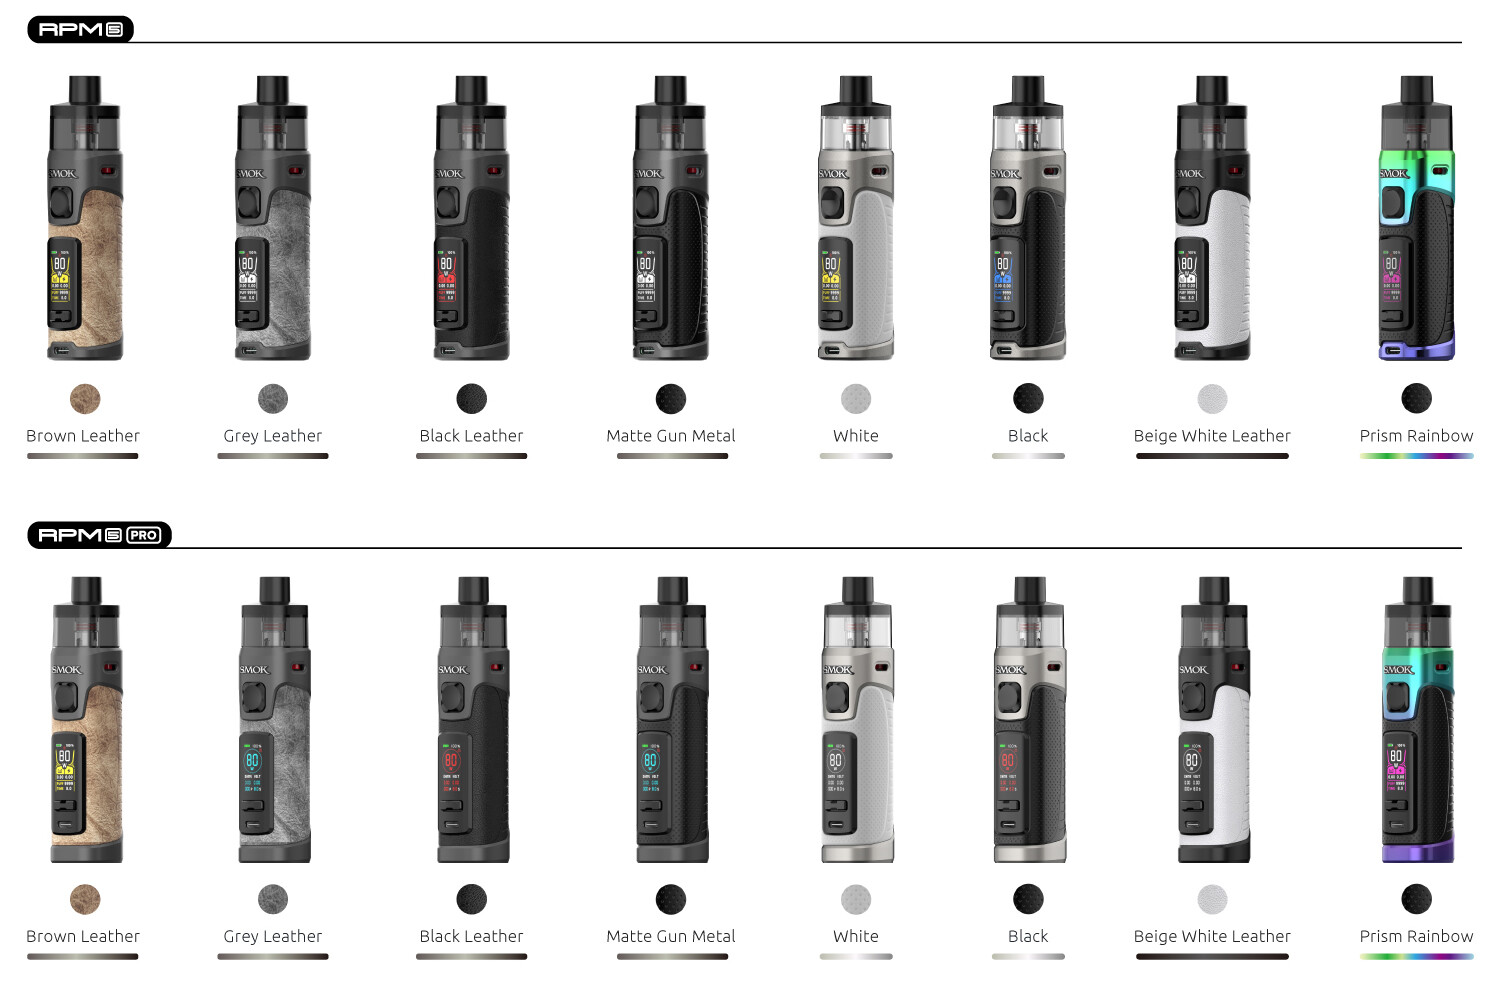 Smok RPM 5 & RPM 5 PRO Review - Vaping Community - Discussions on Vaping